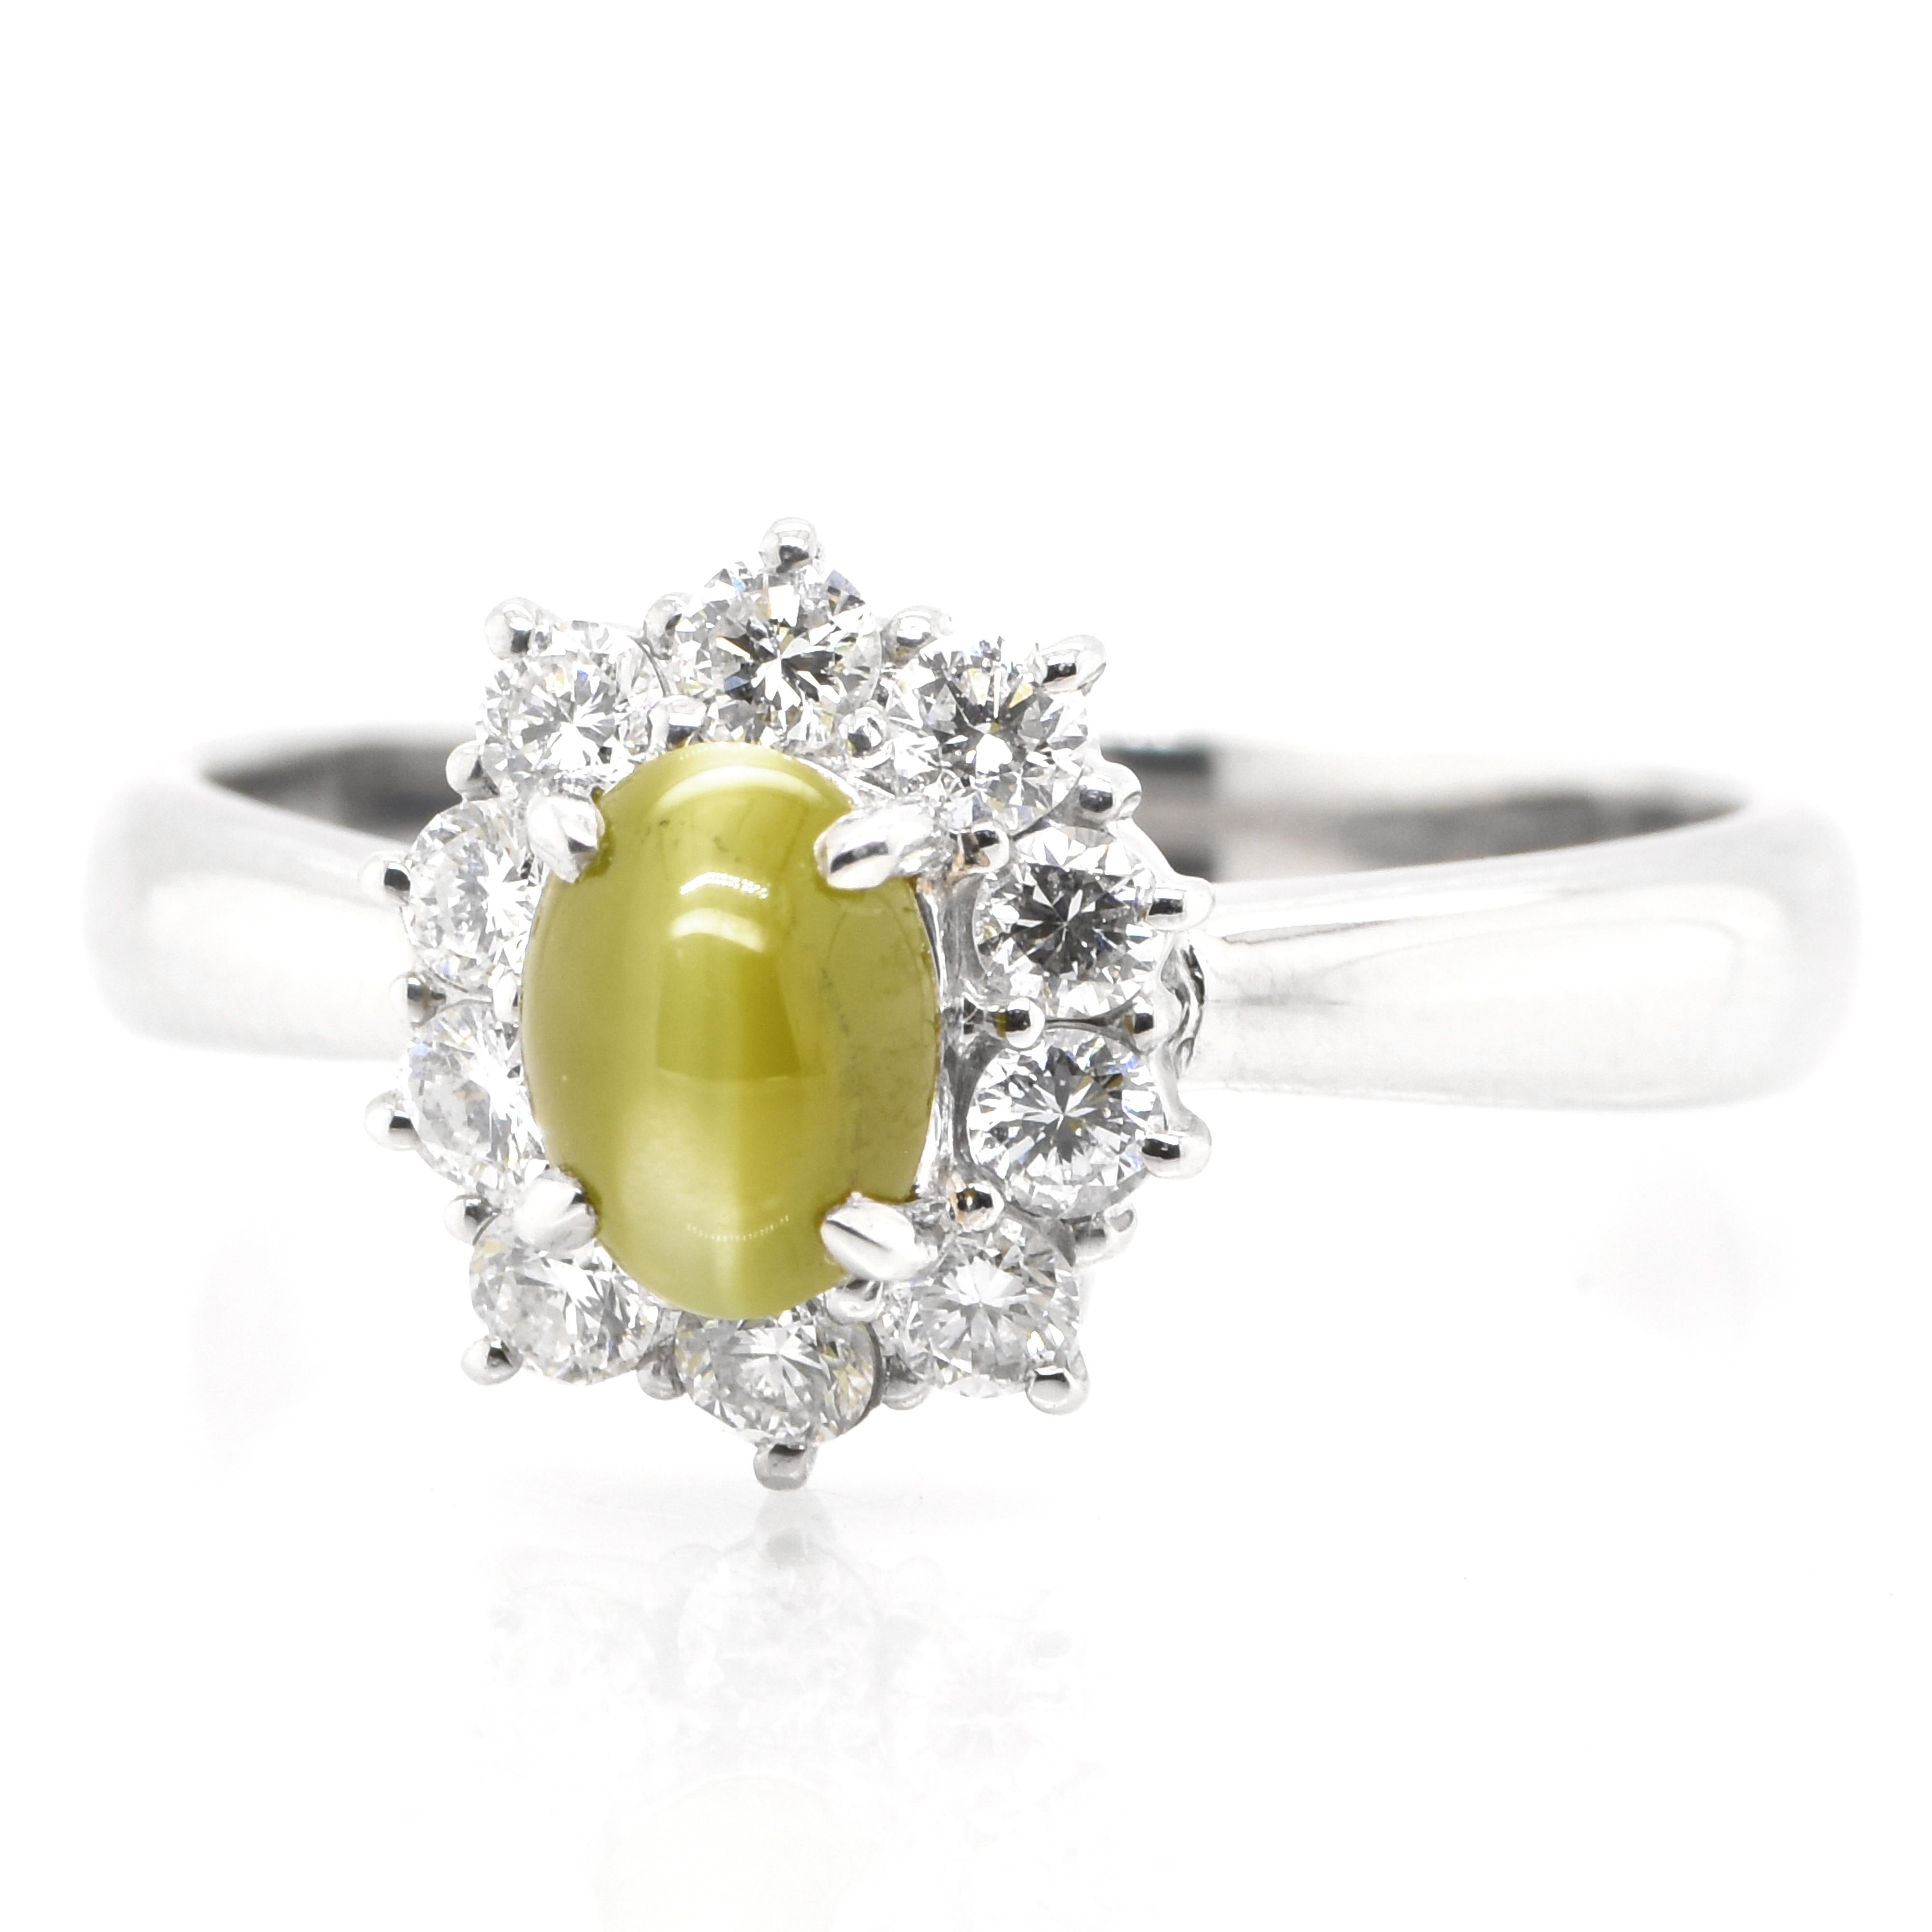 A stunning Ring featuring a 1.38 Carat Natural Cat's Eye Chrysoberyl and 0.41 Carats Diamond Accents set in Platinum. Cat's Eye Chrysoberyl exhibit a unique, naturally occurring phenomena called Chatoyancy or 